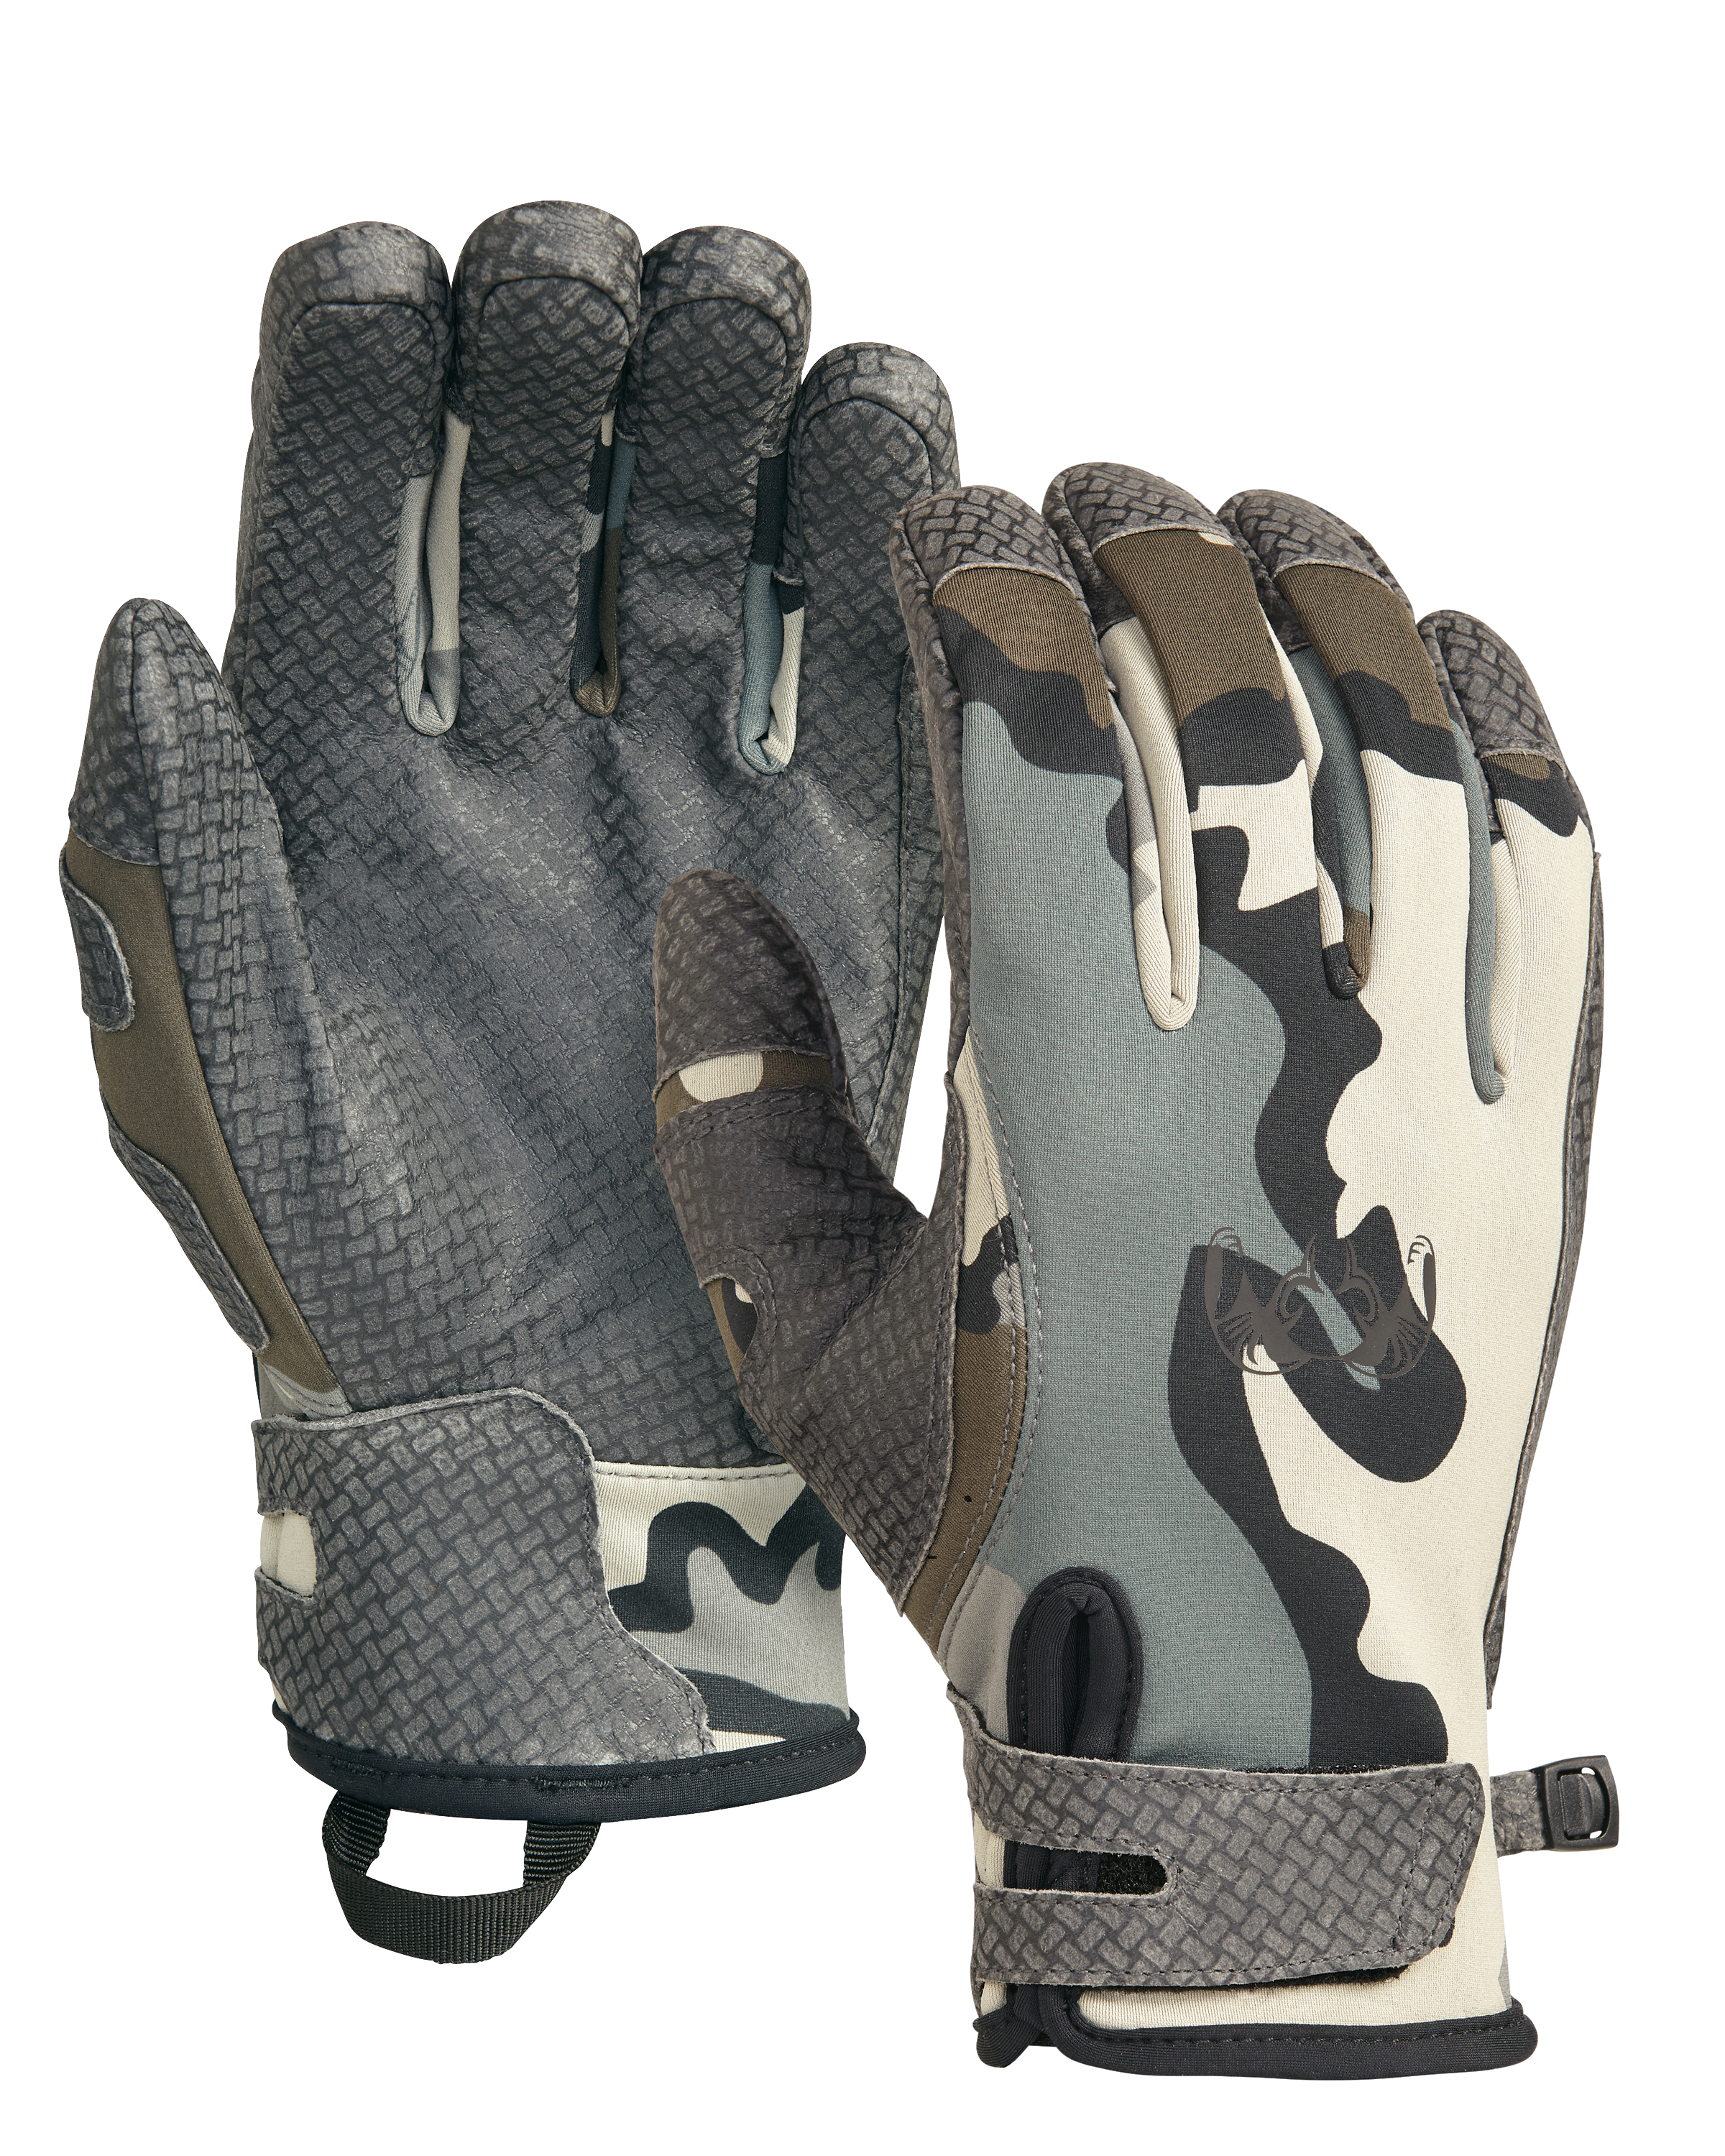 KUIU Guide X Hunting Glove in Vias | Size 2XL